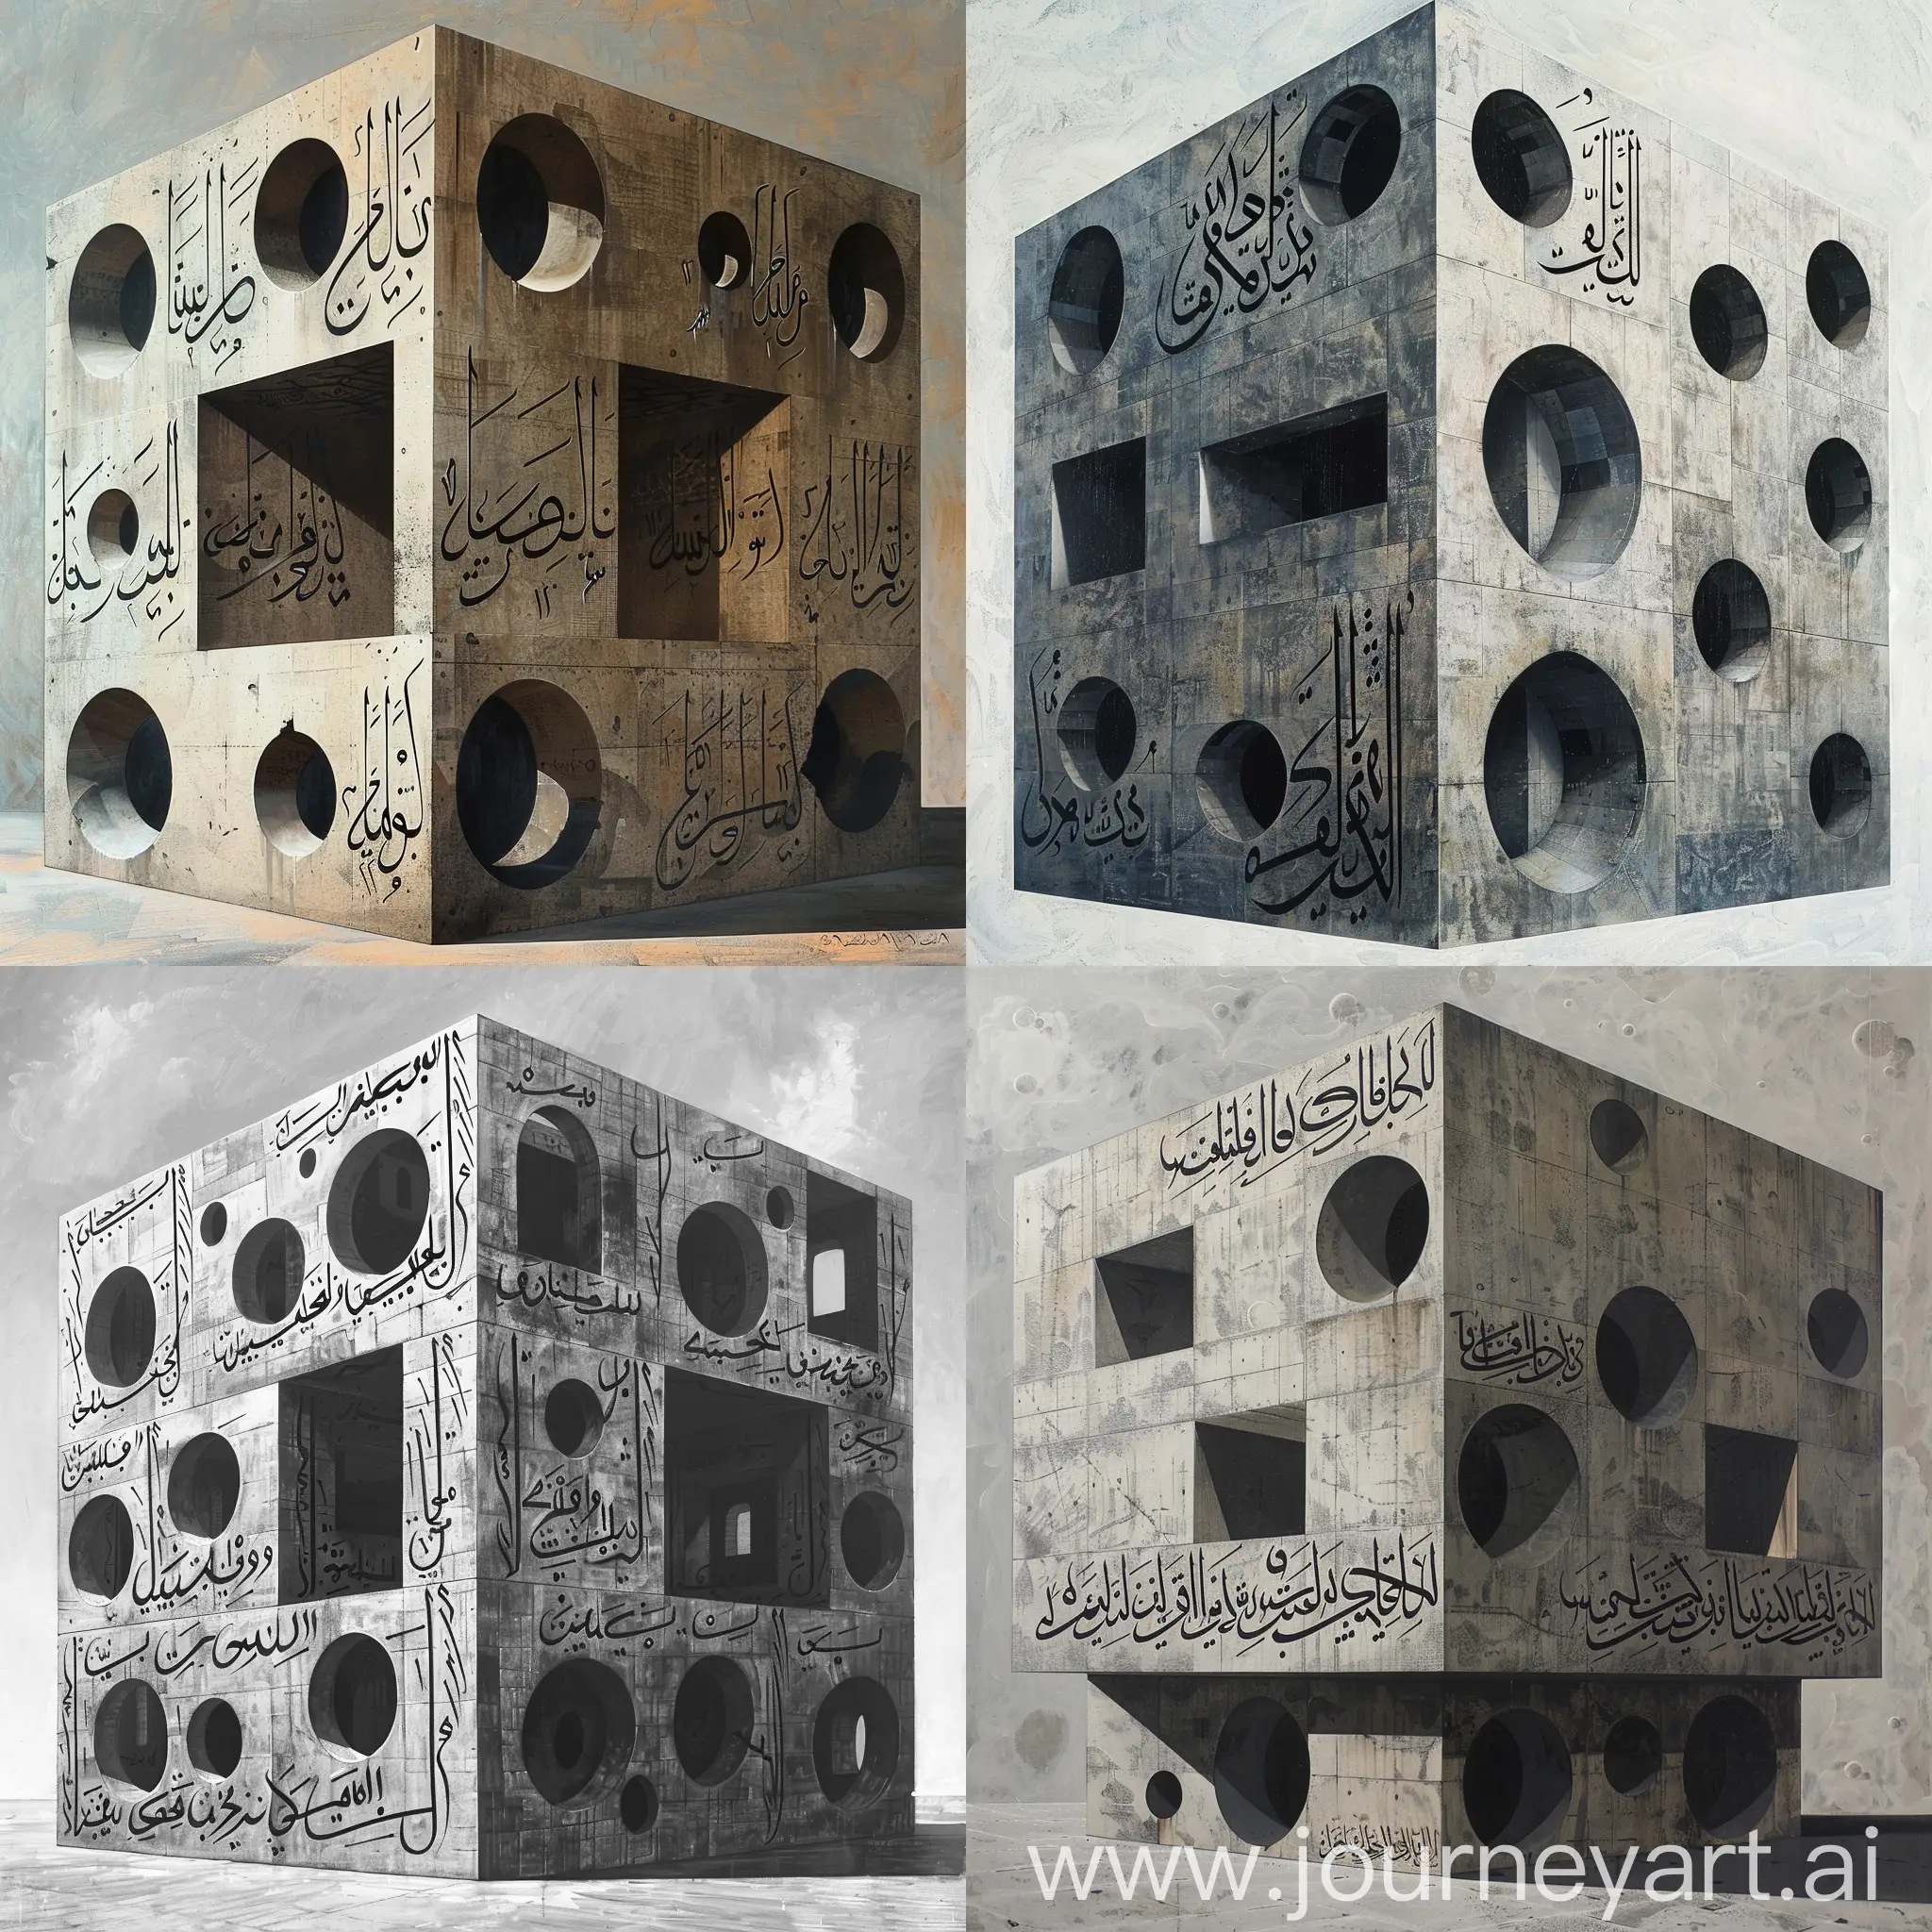 Persian-Calligraphy-Adorning-Cube-Building-with-Round-Windows